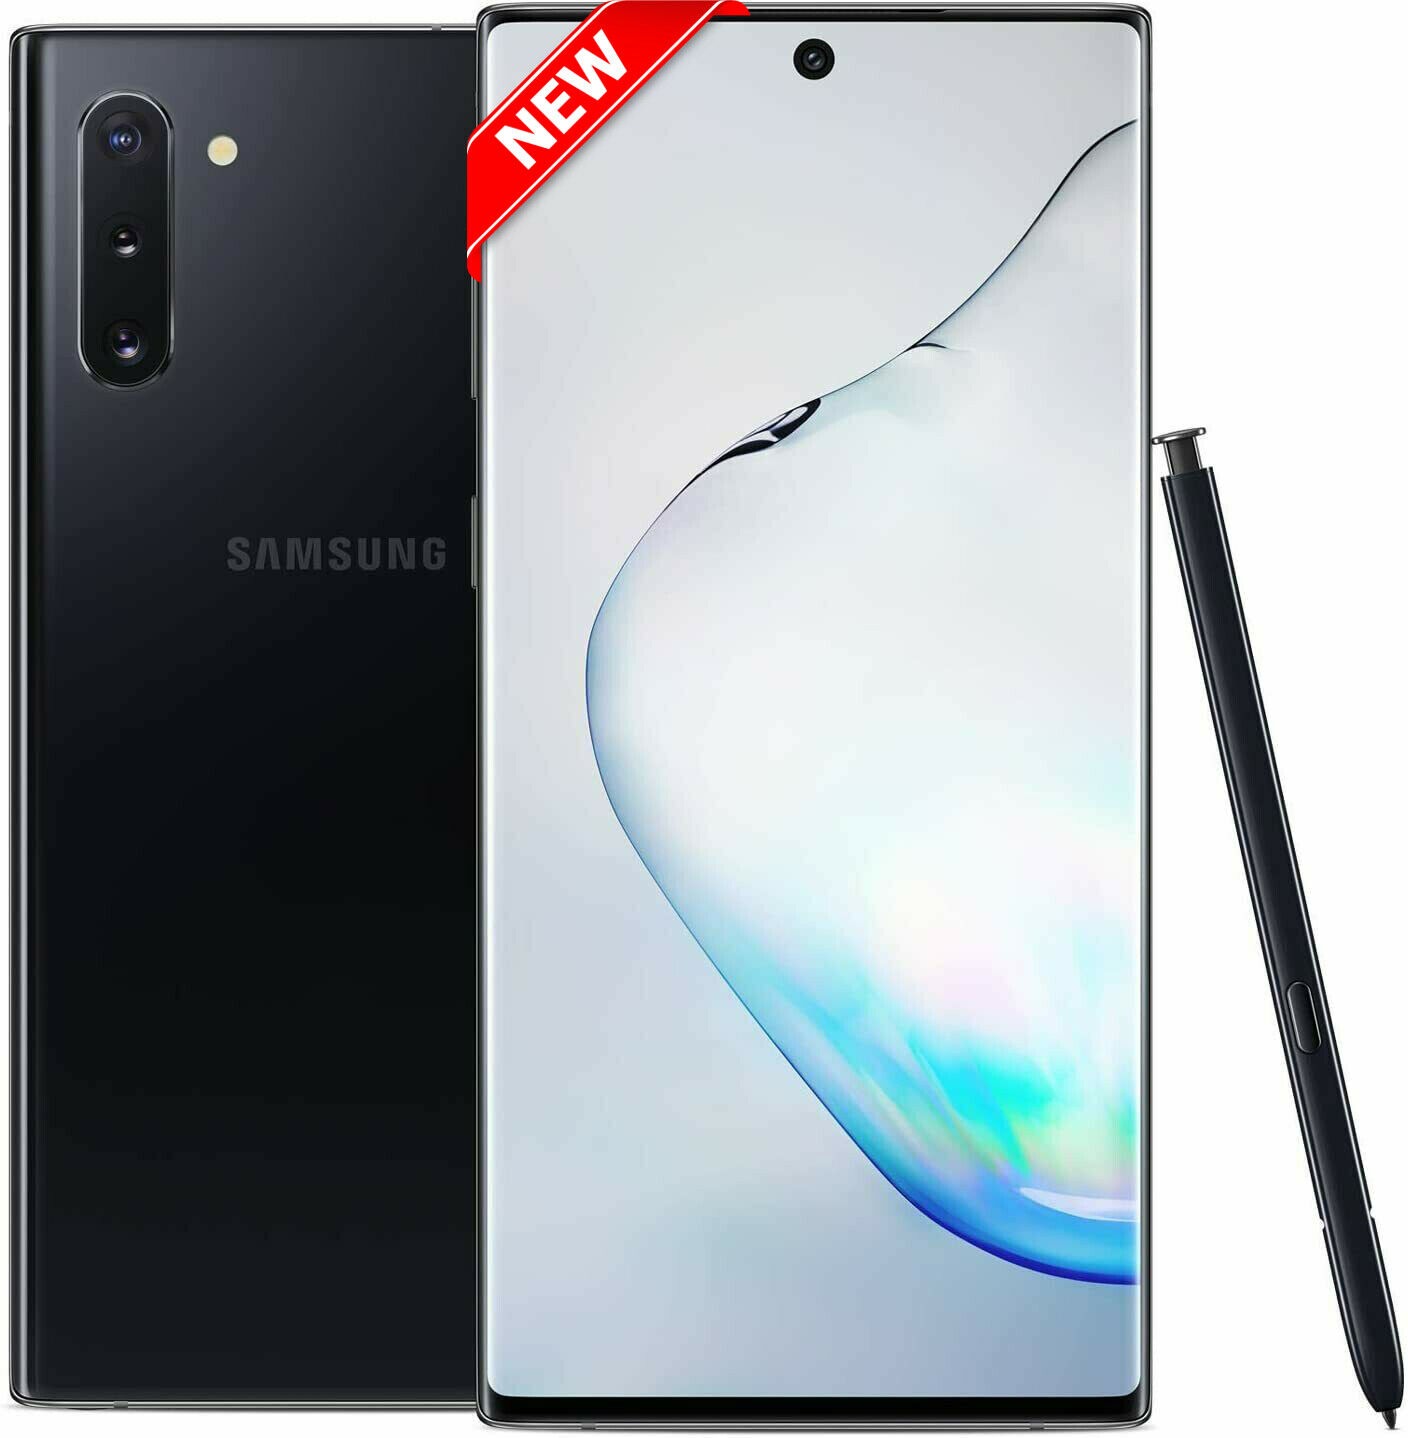 Unlocked Samsung Galaxy Note10 256GB Android Smartphone $365